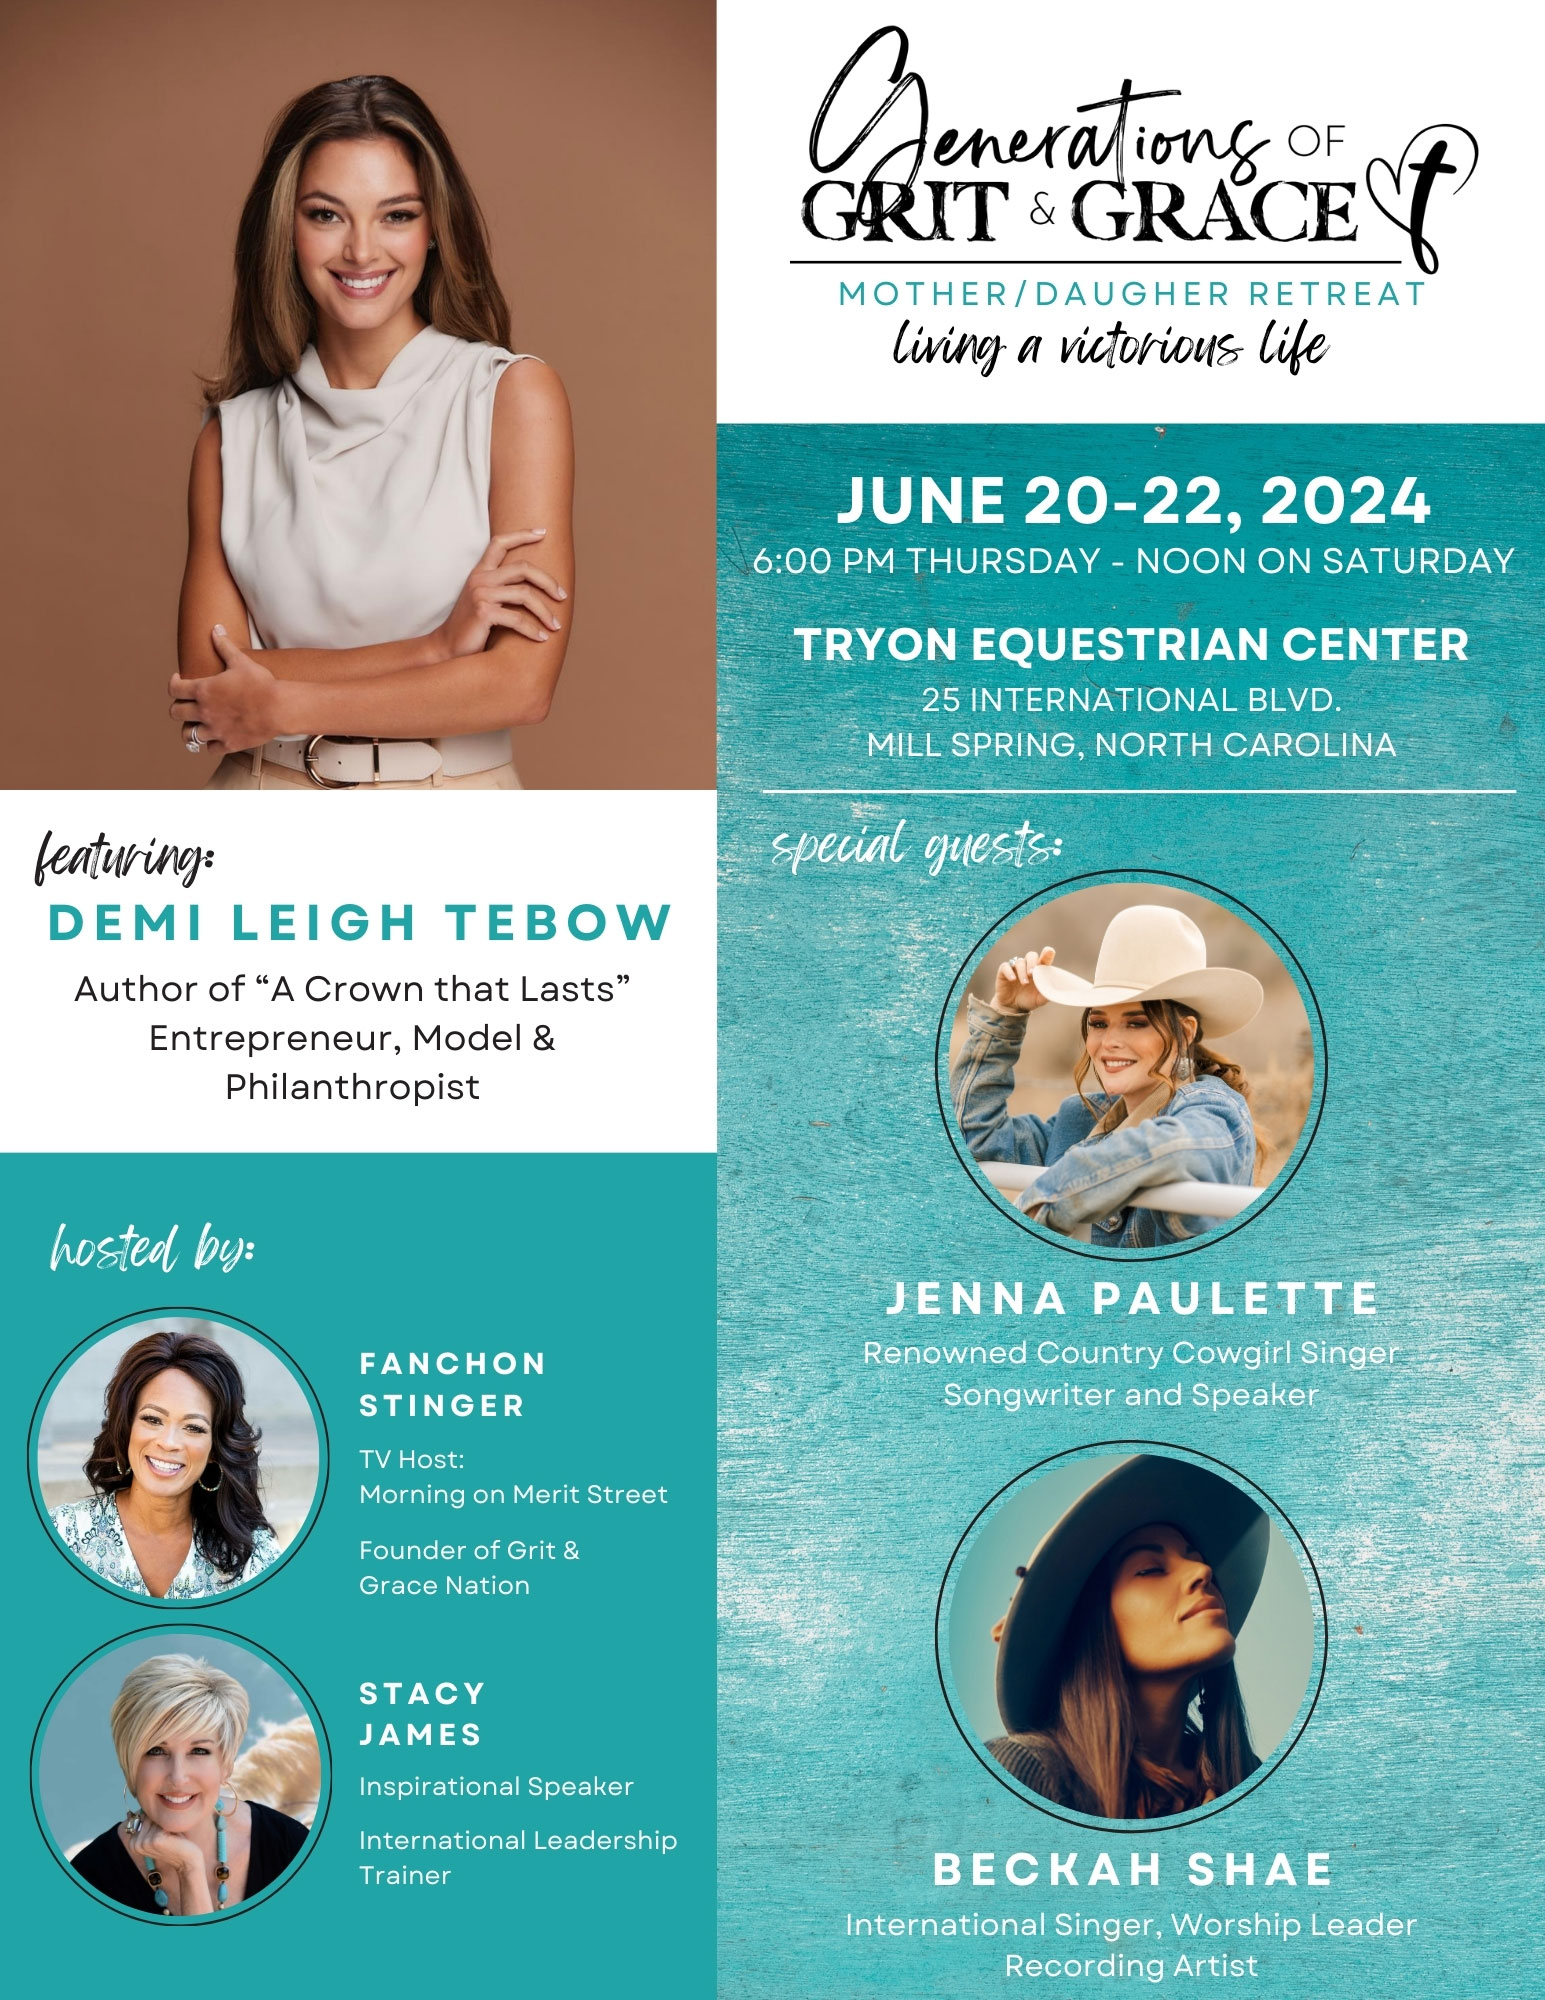 Generations of Grit & Grace - Mother/Daughter Retreat - living a victorious life - featuring Demi Leigh Tebow - Auther of A Crown that Lasts